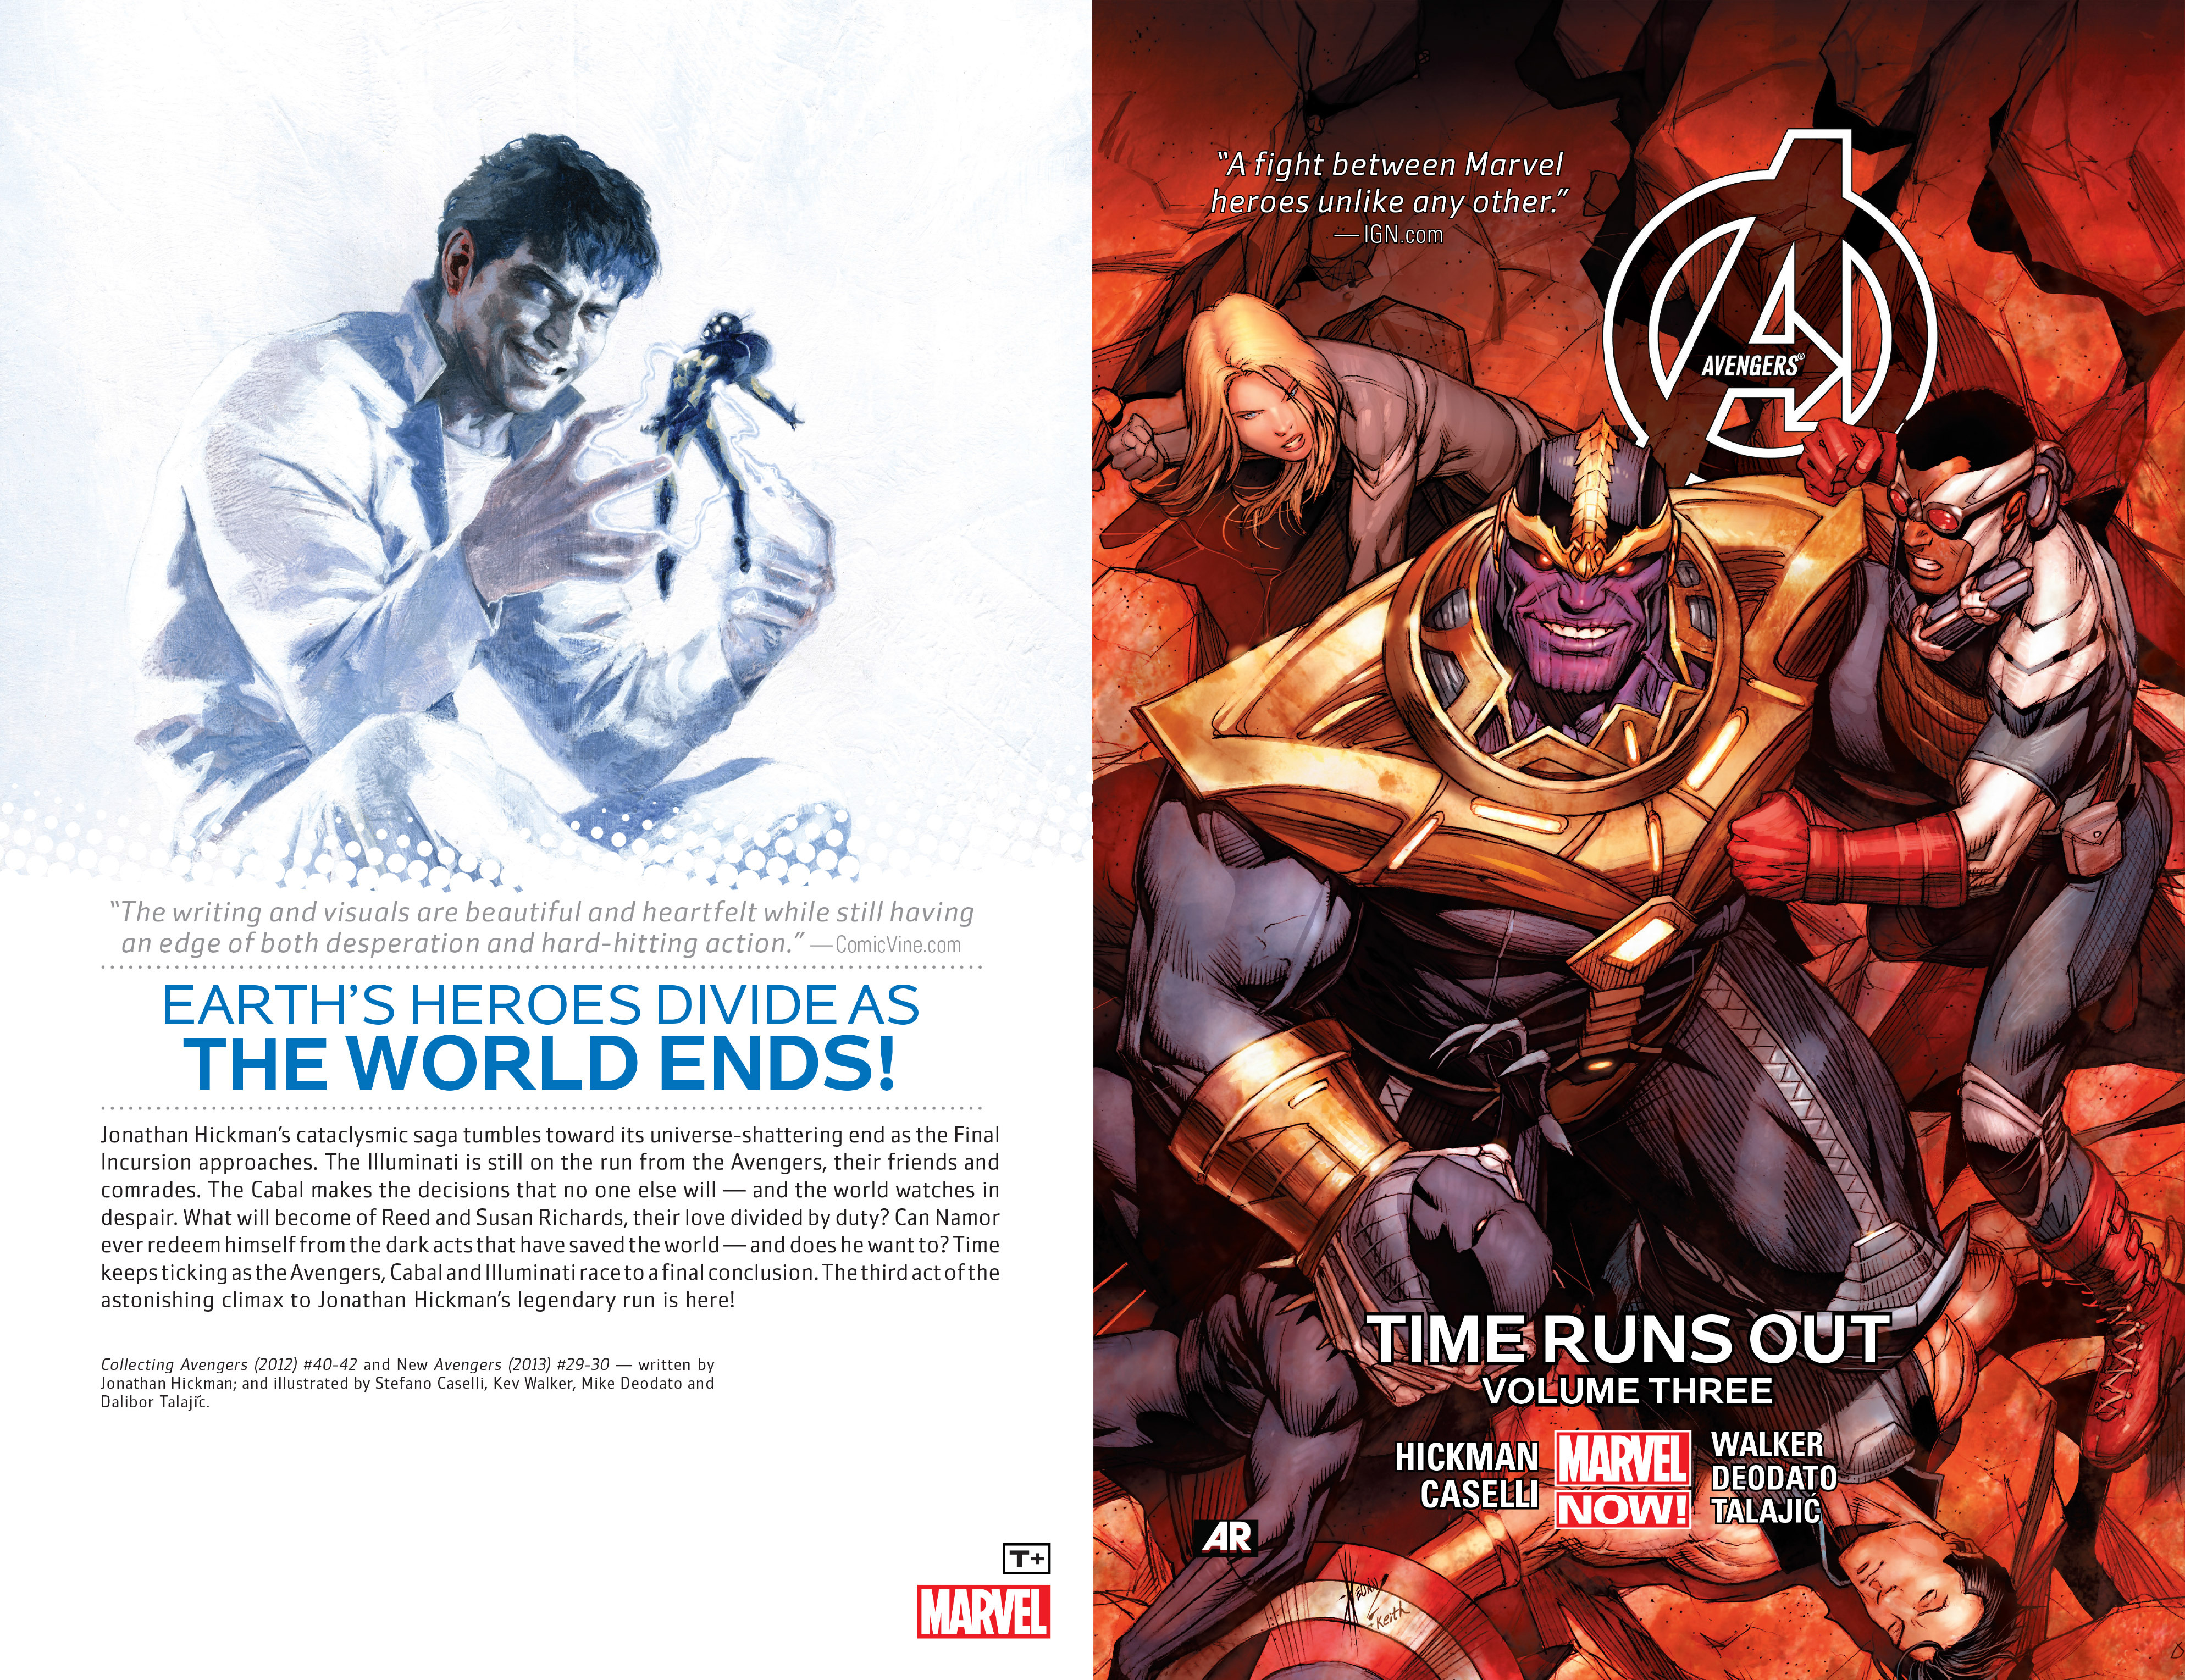 Avengers: Time Runs Out TPB_3 Page 1